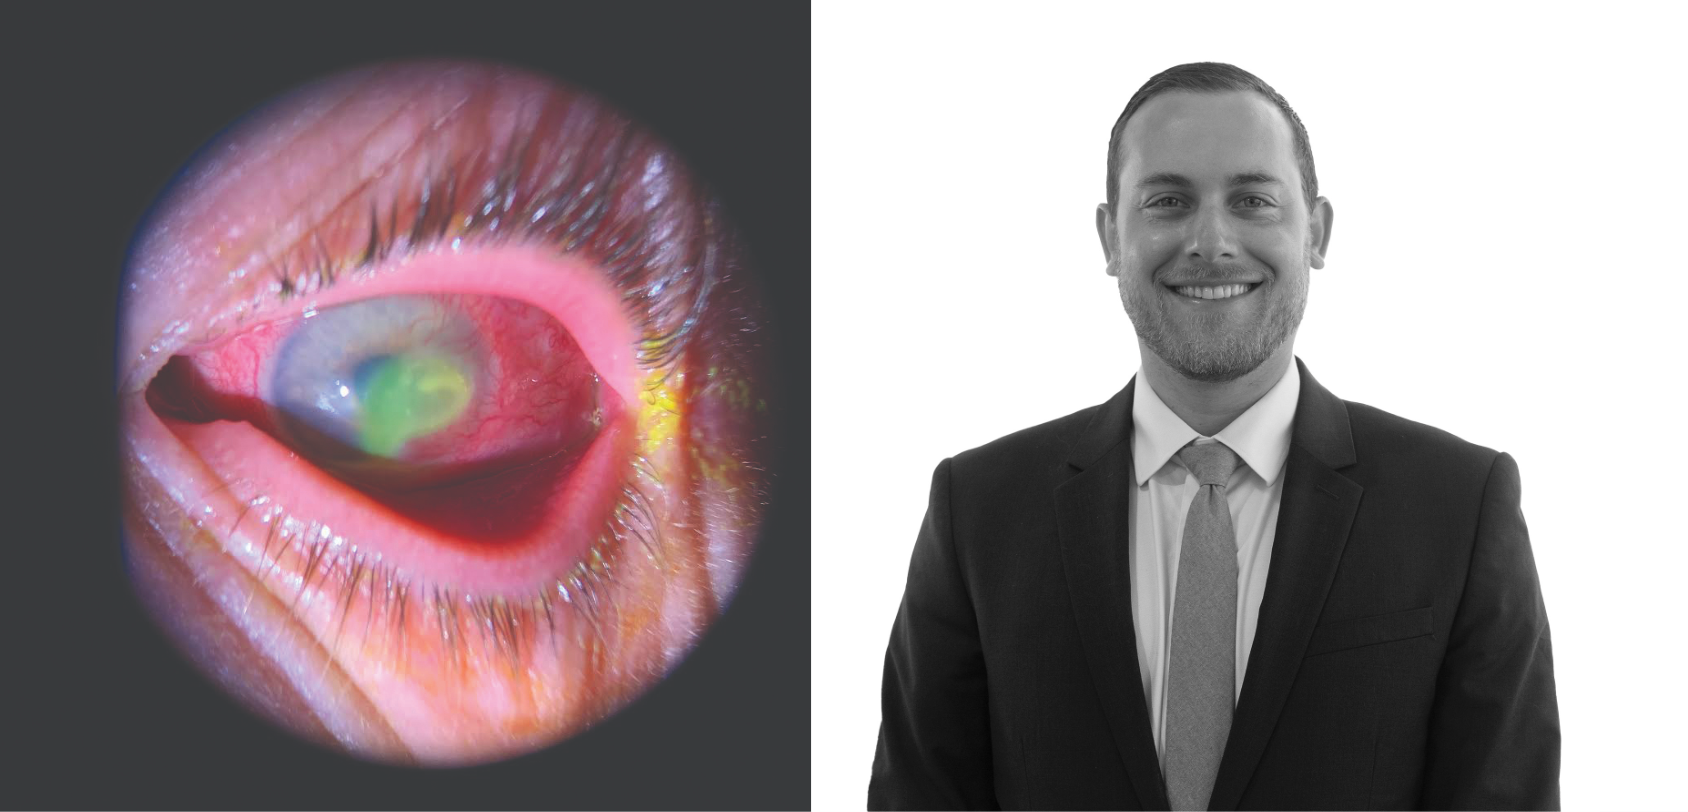 Fortified antibiotic advance improves corneal infection treatment paradigm